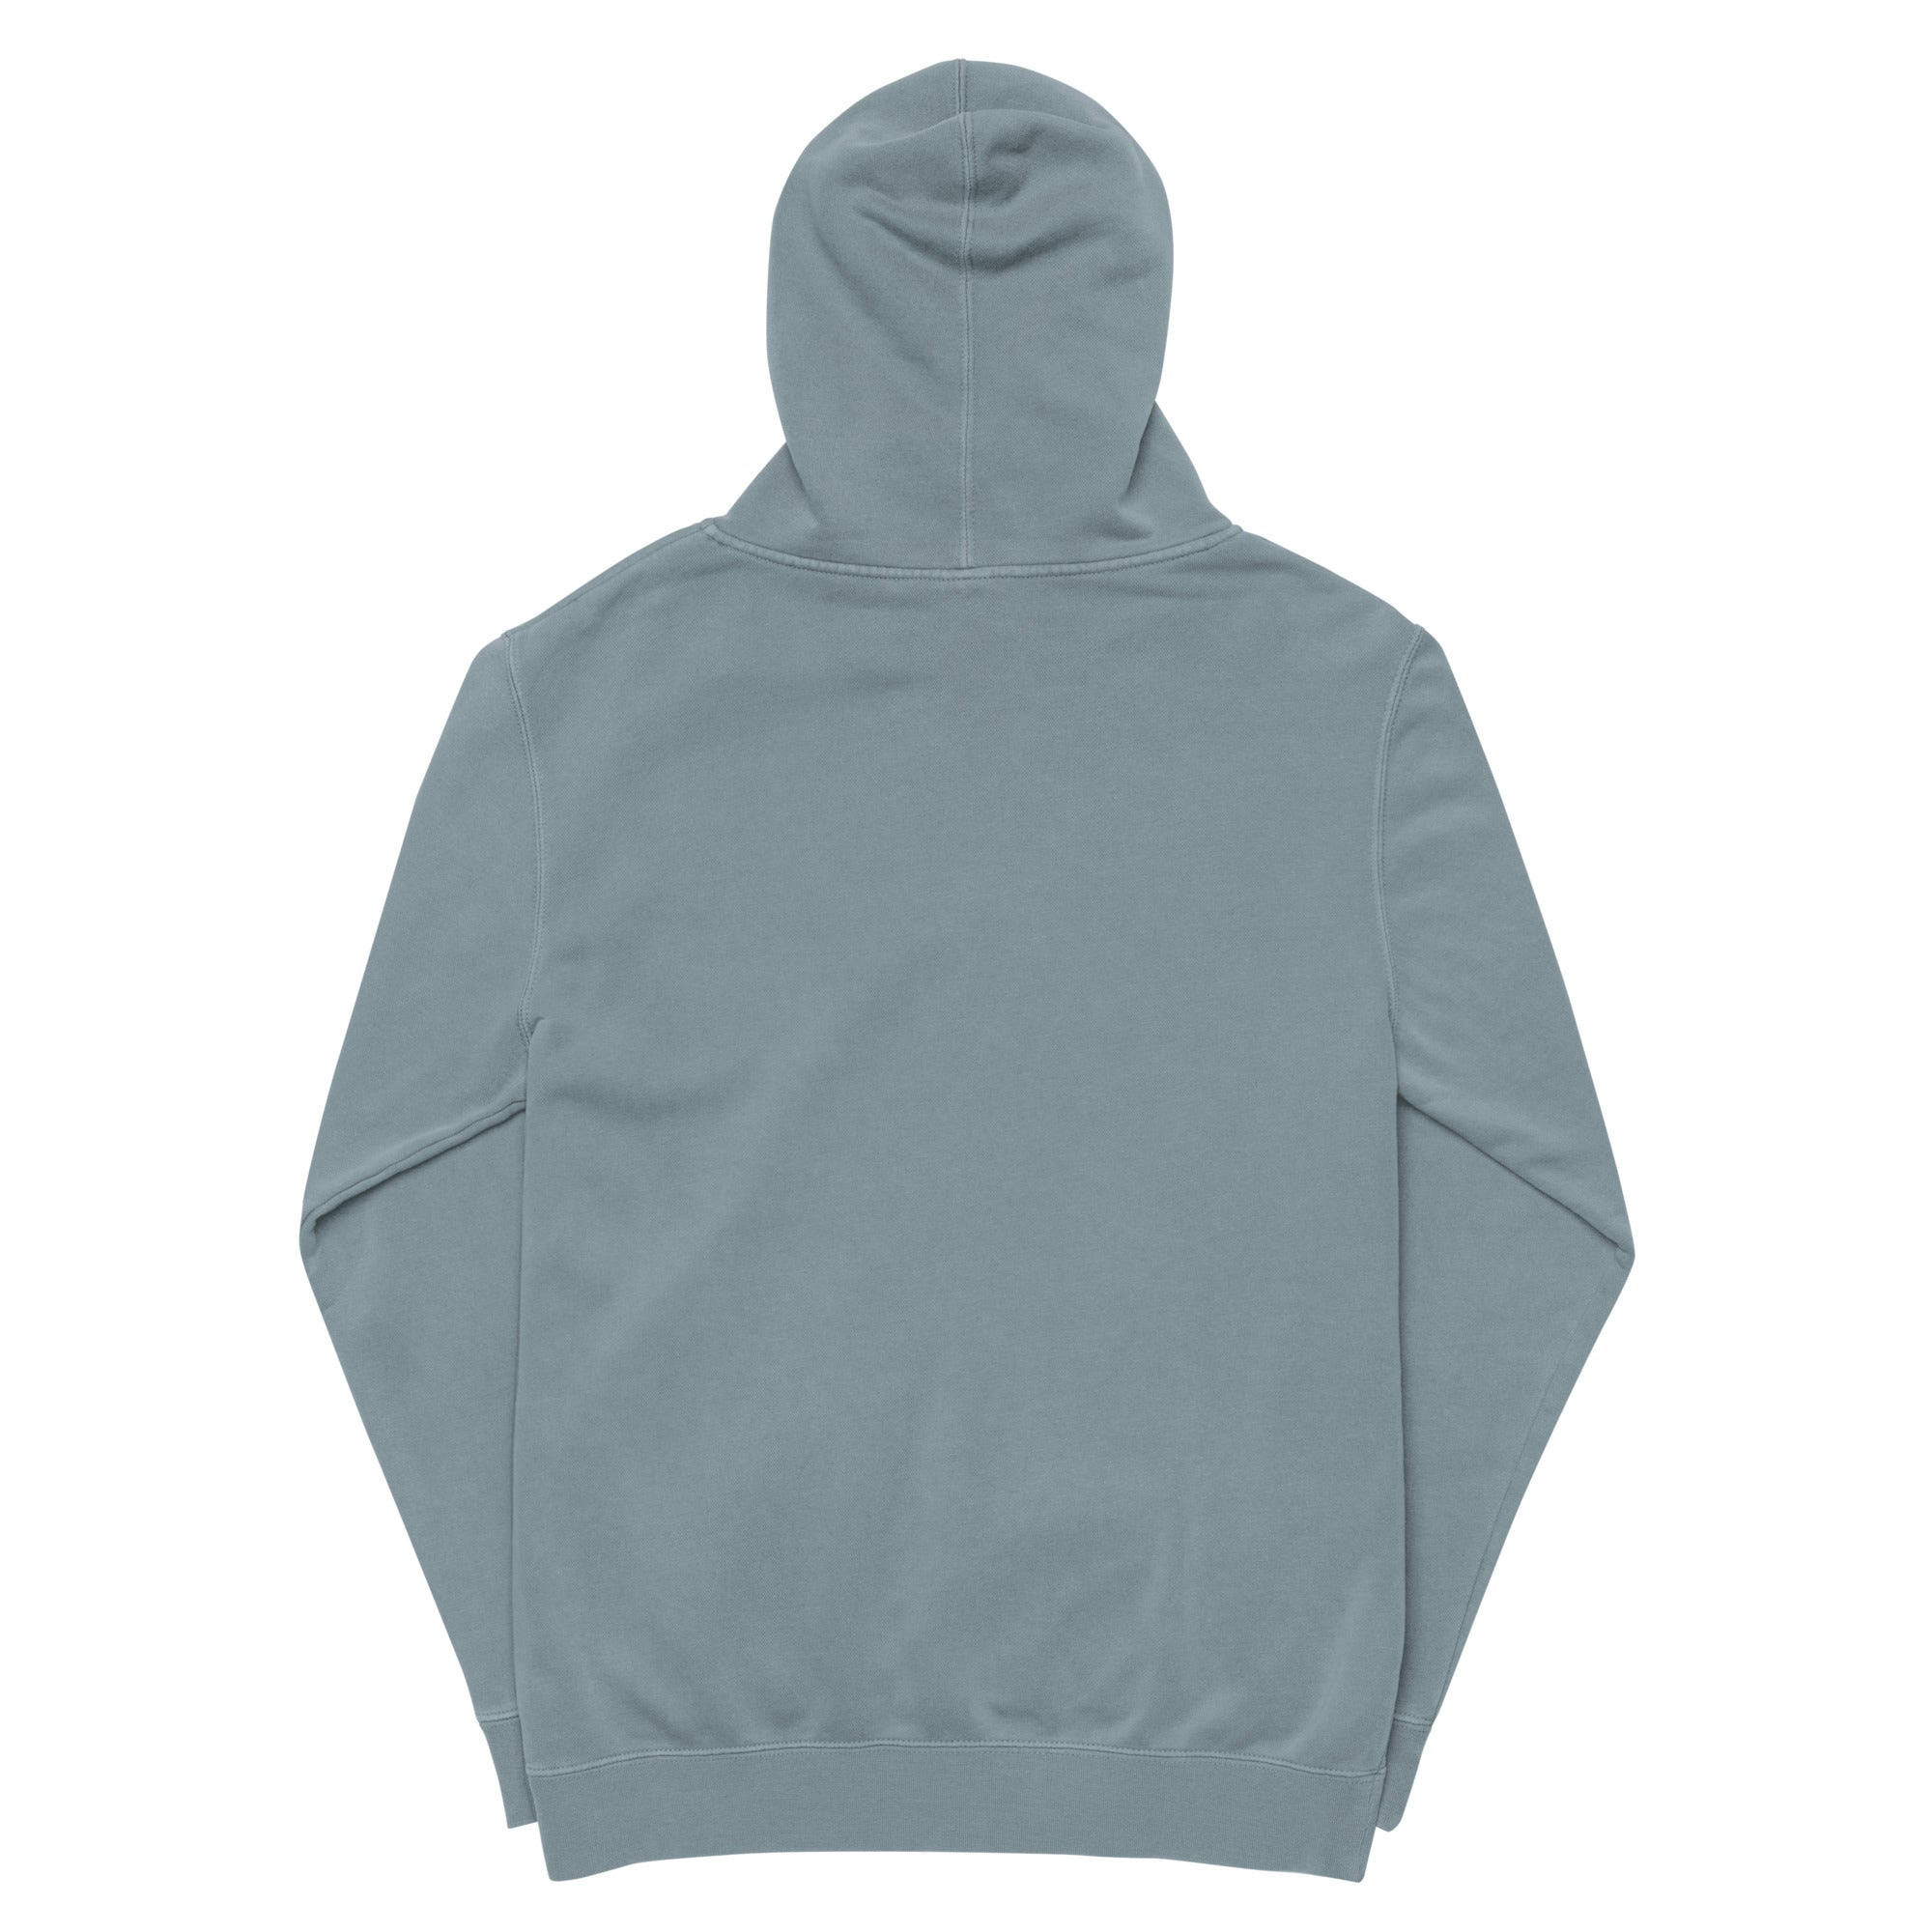 Outlaws Unisex pigment-dyed hoodie